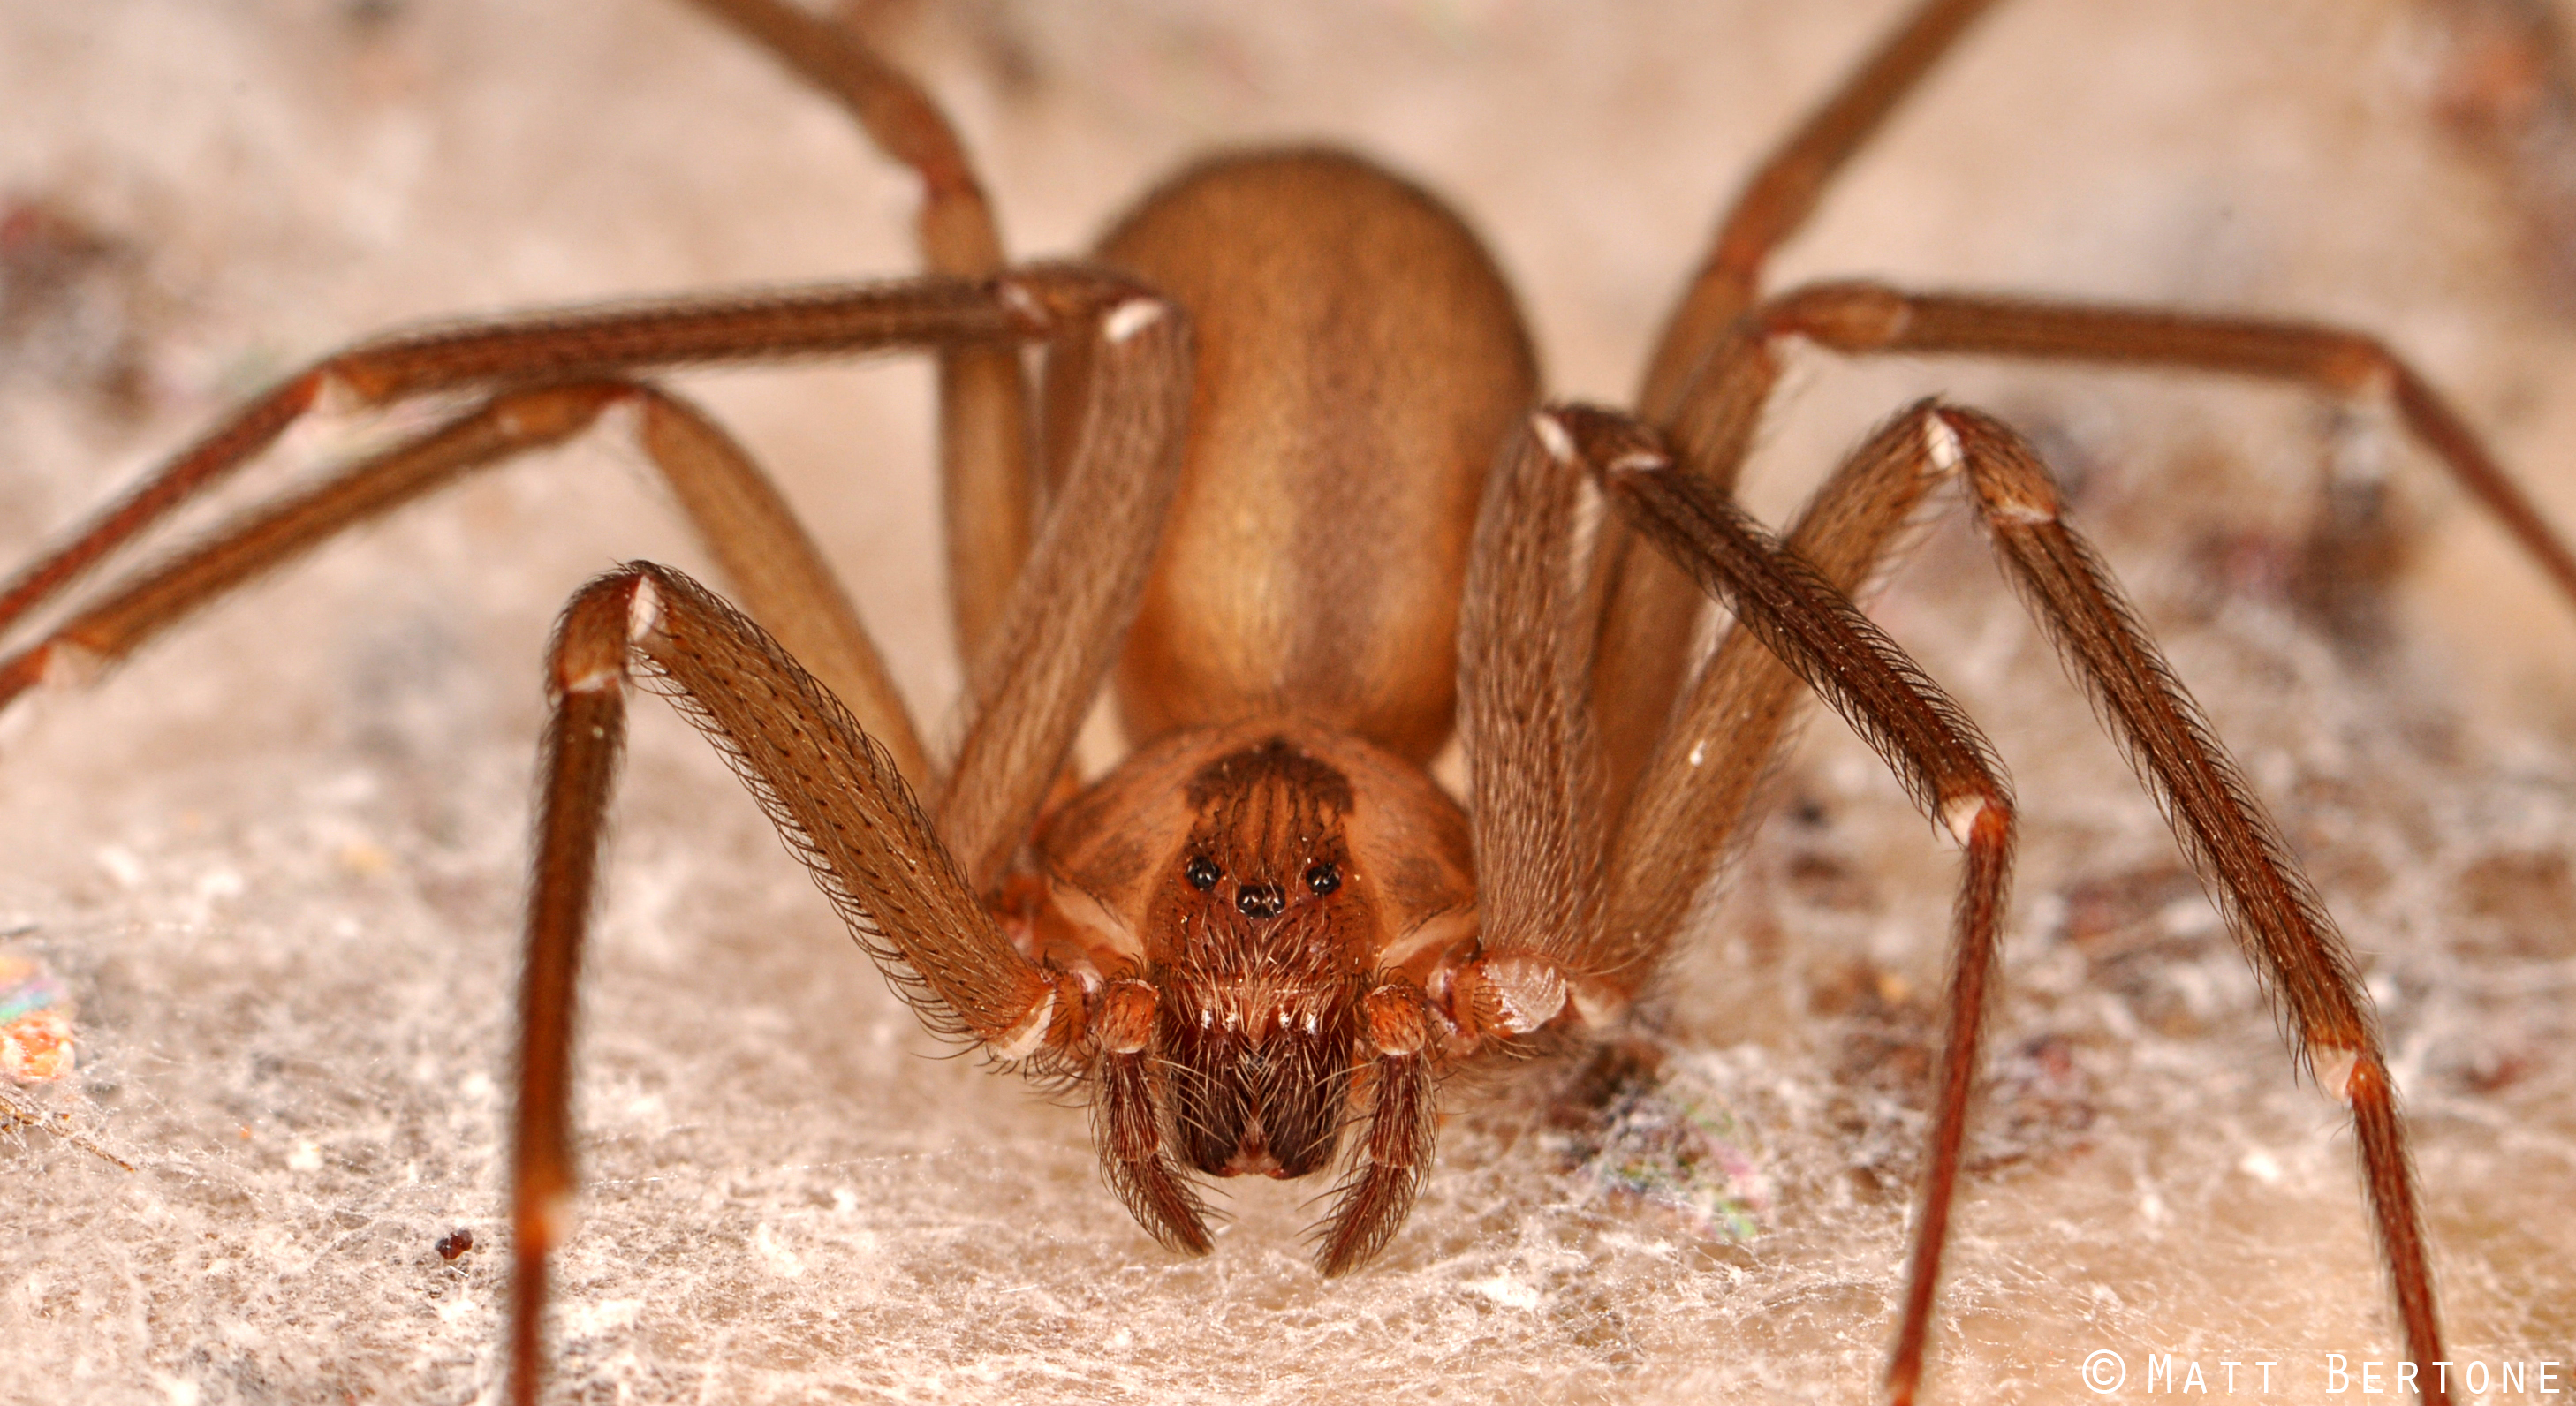 Two Cases of Recluse Spider Bites in NC